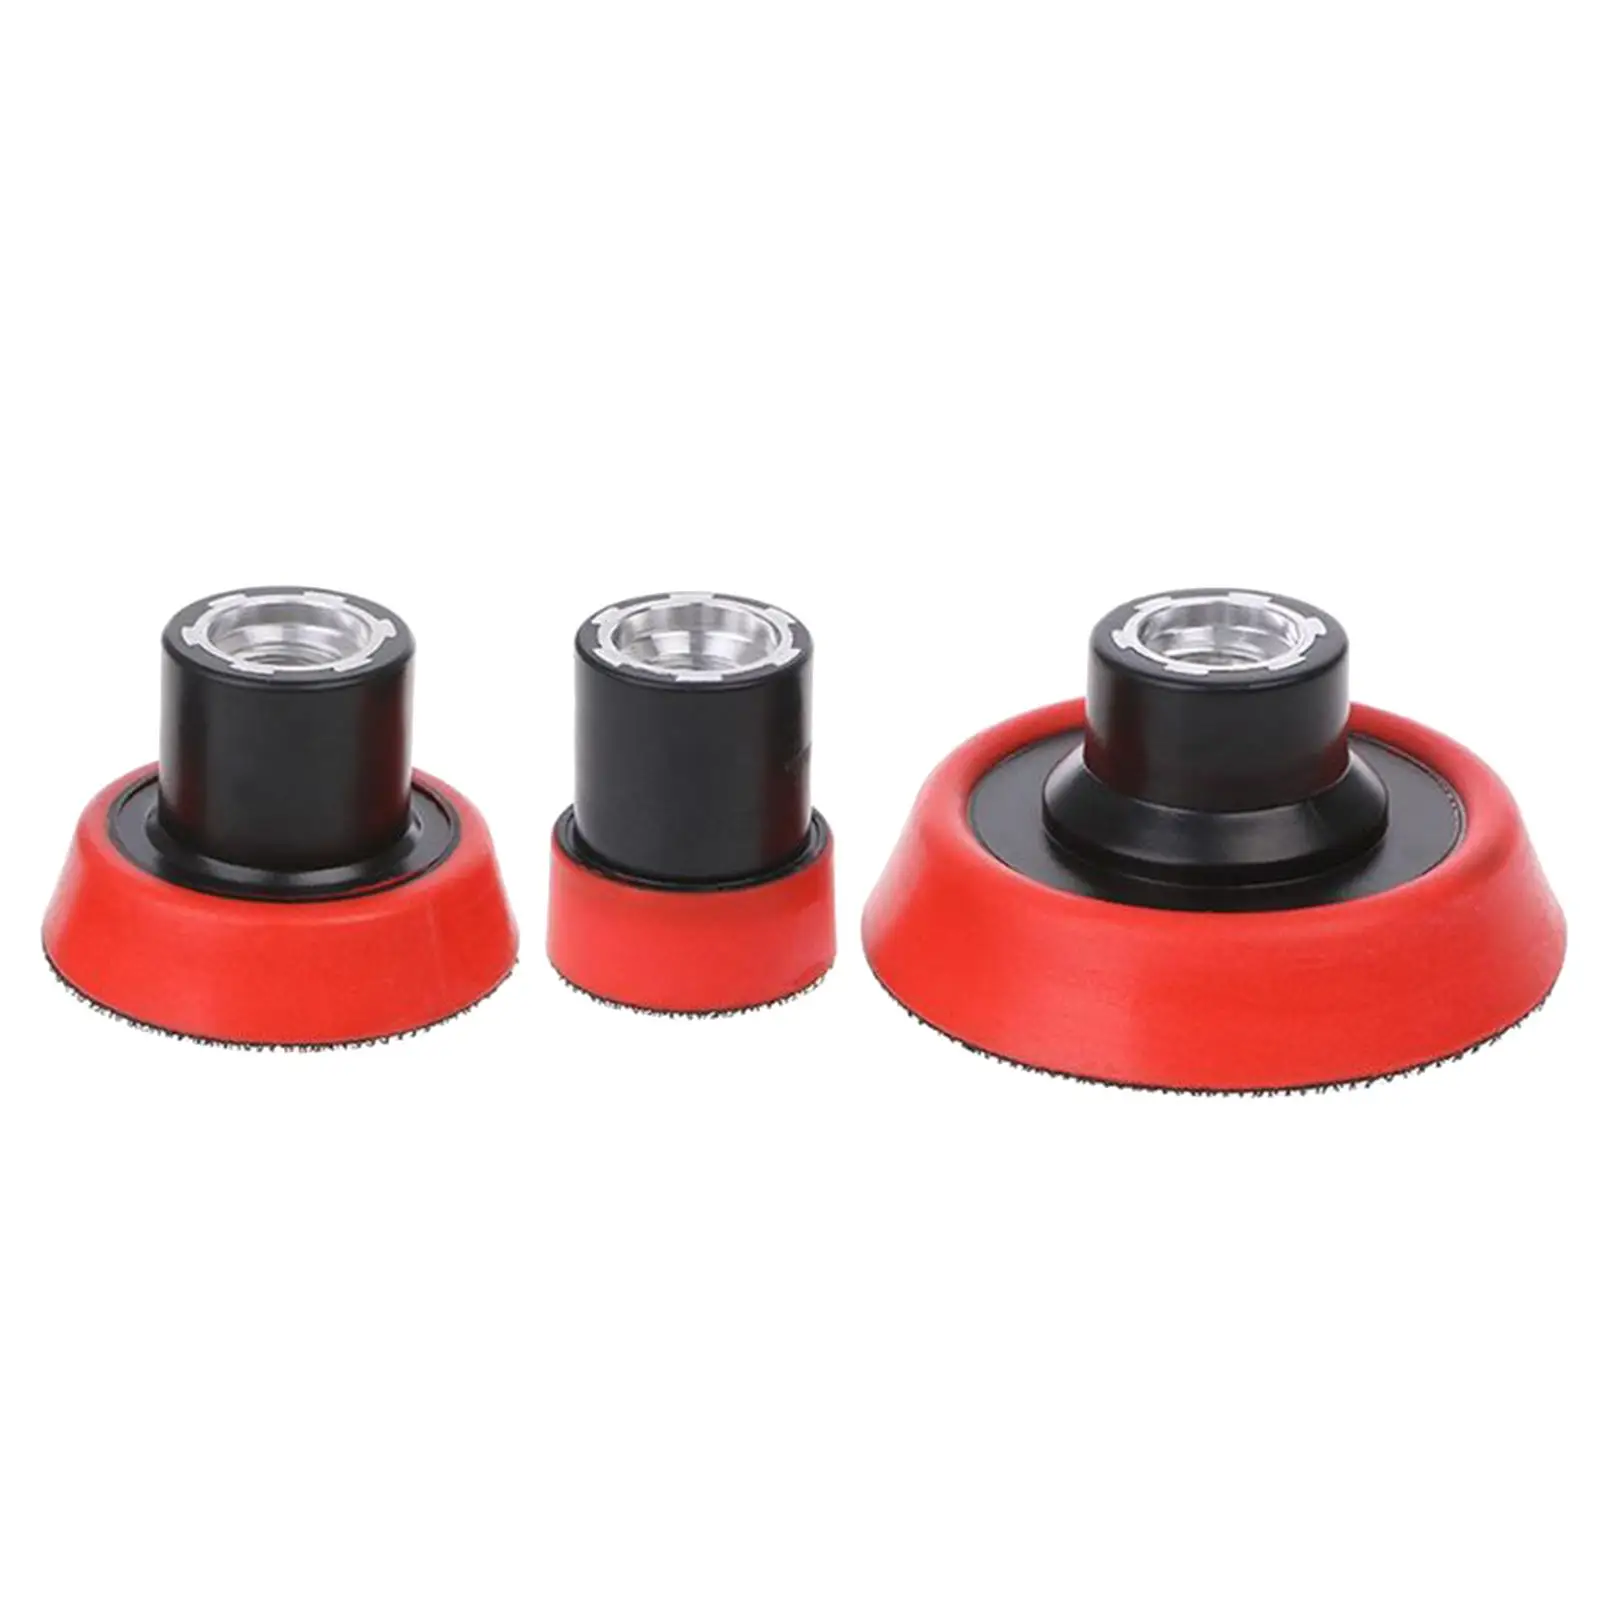 3x Backing Plate Buffering Set Parts Backer M10 Polisher Rotary Buffing Plate for Car Care Detailing Polishing Car Wash